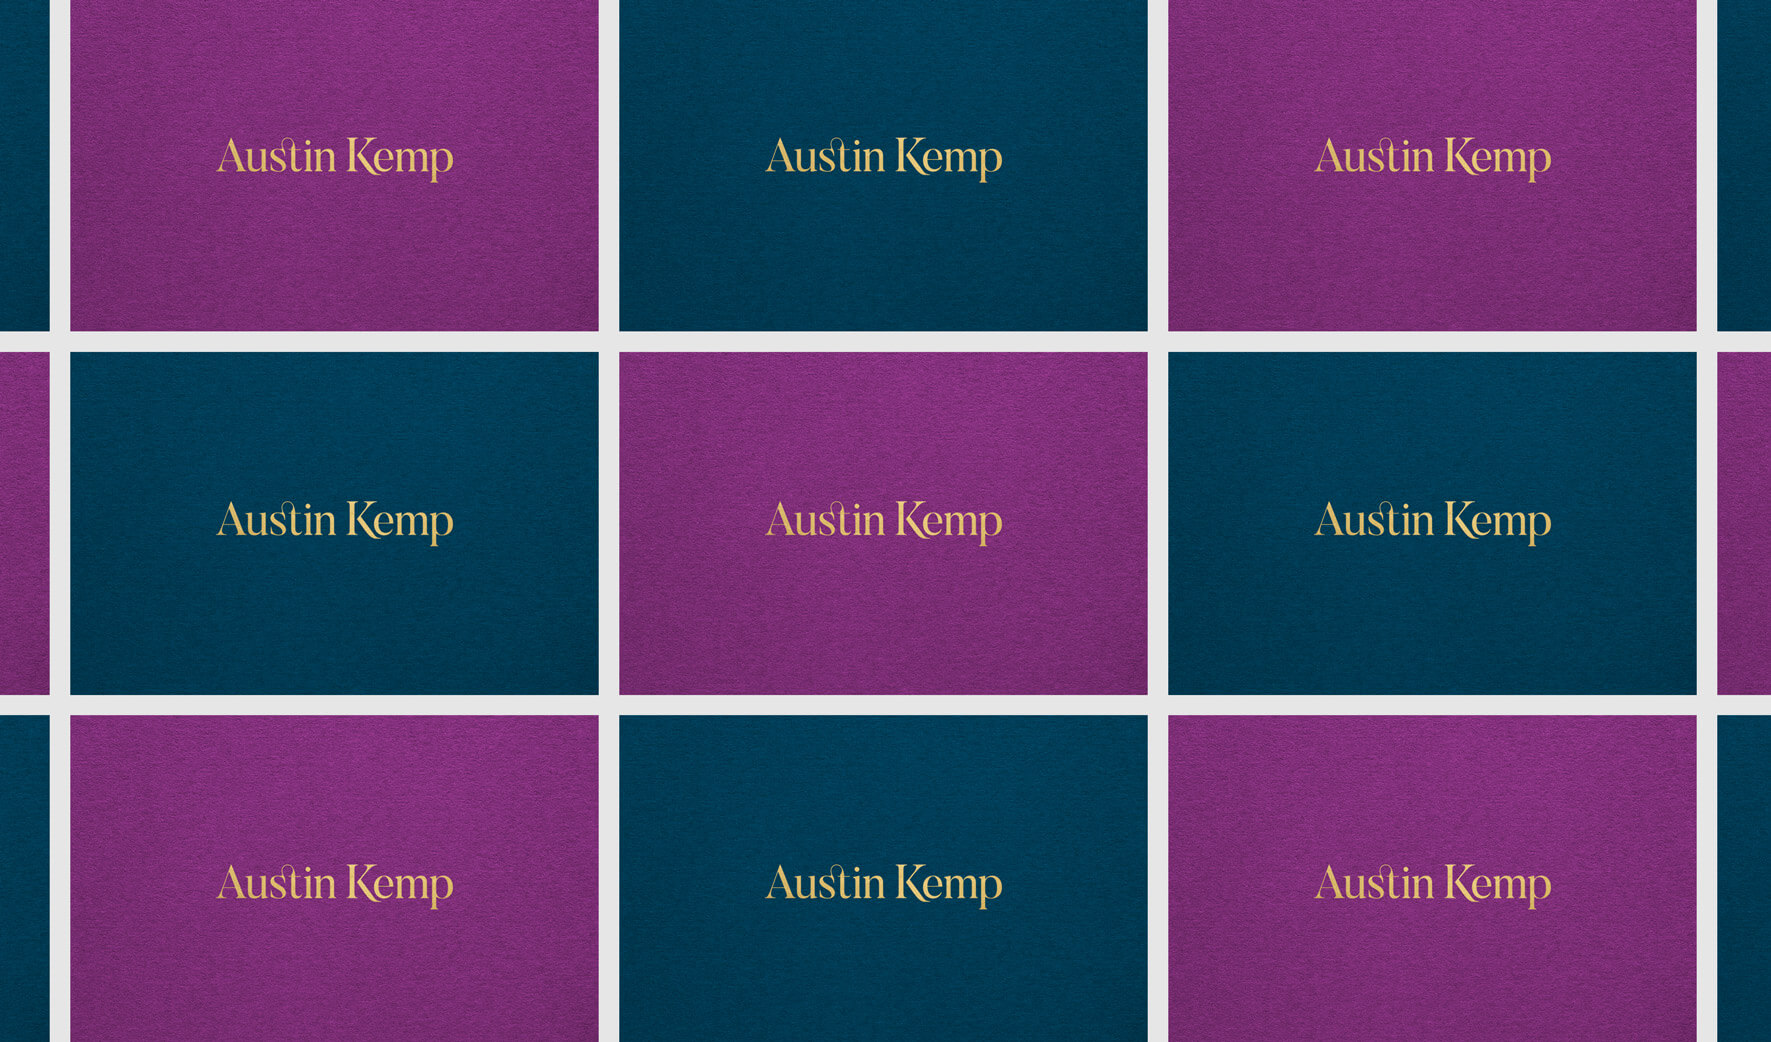 Austin Kemp Business Cards Lined Up